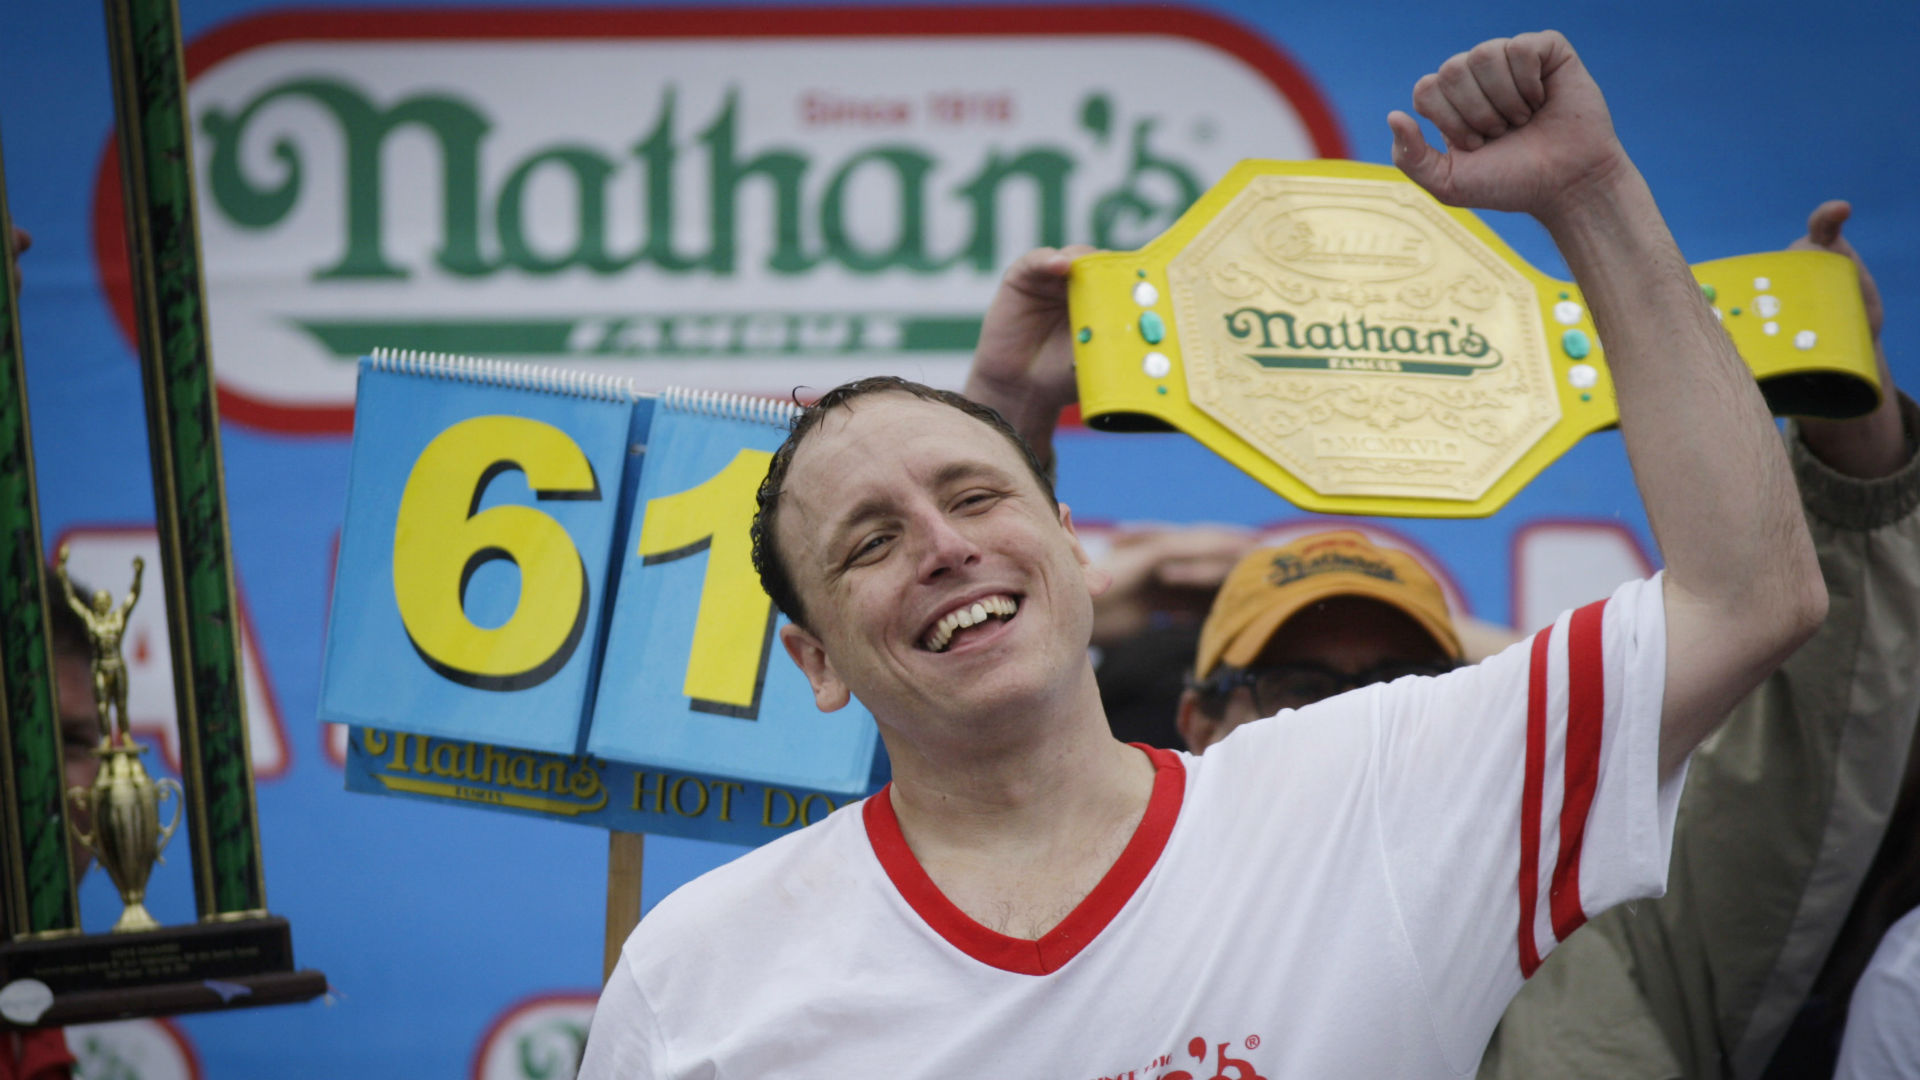 Photo of Odds and prop betting for Nathan’s hot dog contest: Can you believe that Joey Chestnut will win the mustard belt in 2021?